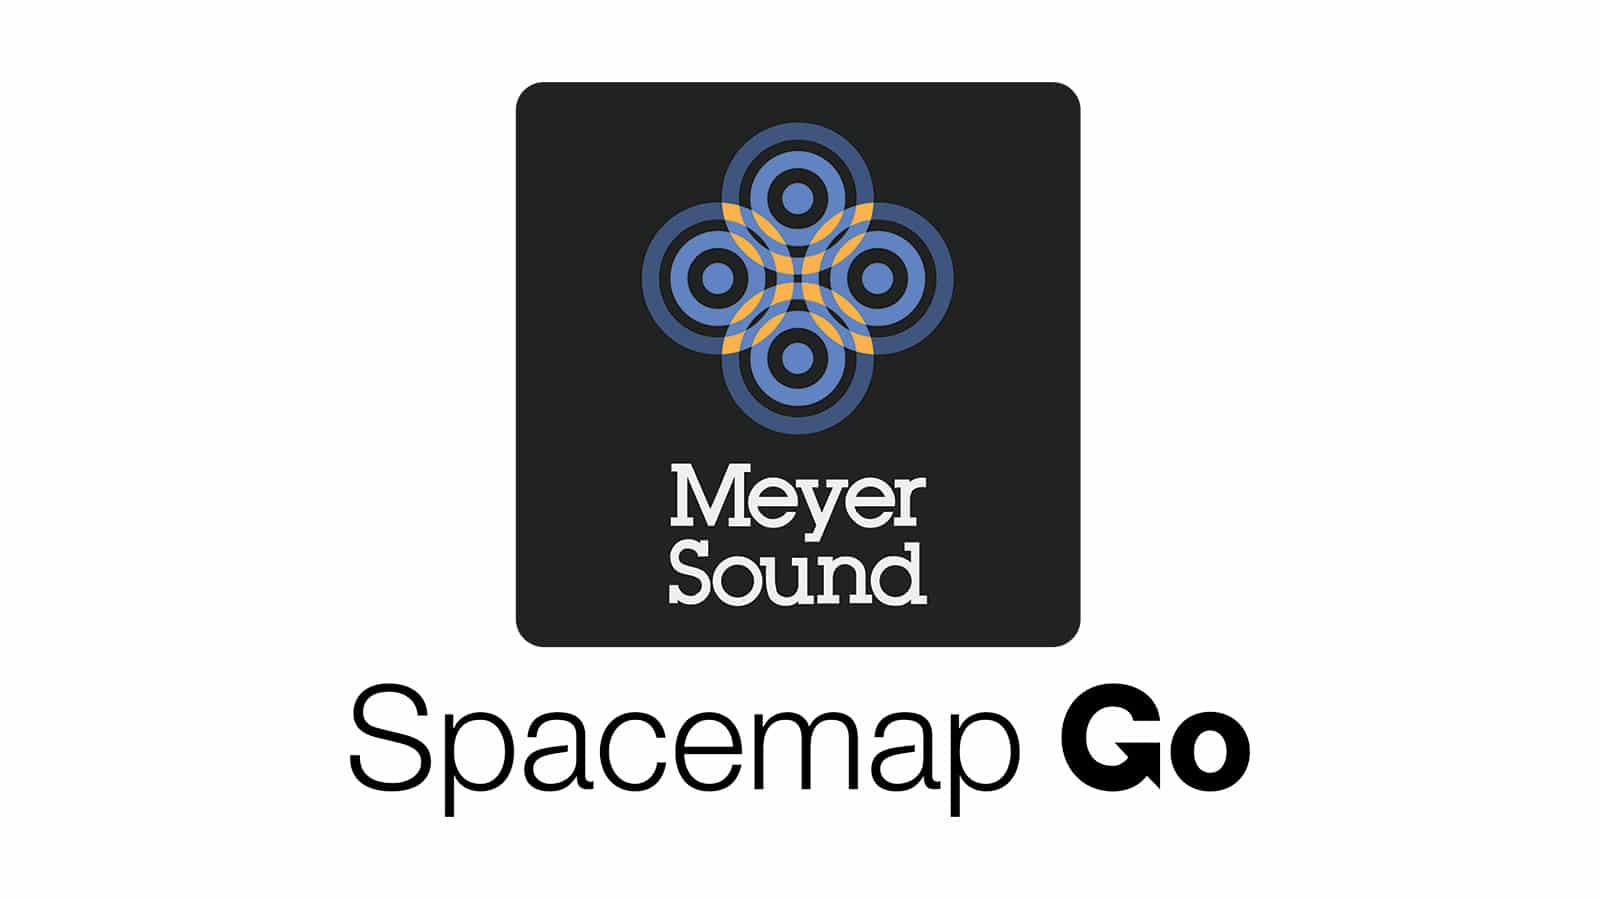 Meyer Sound Introduces Spacemap Go Plugin for Avid VENUE | S6L Live Sound Consoles and Pro Tools